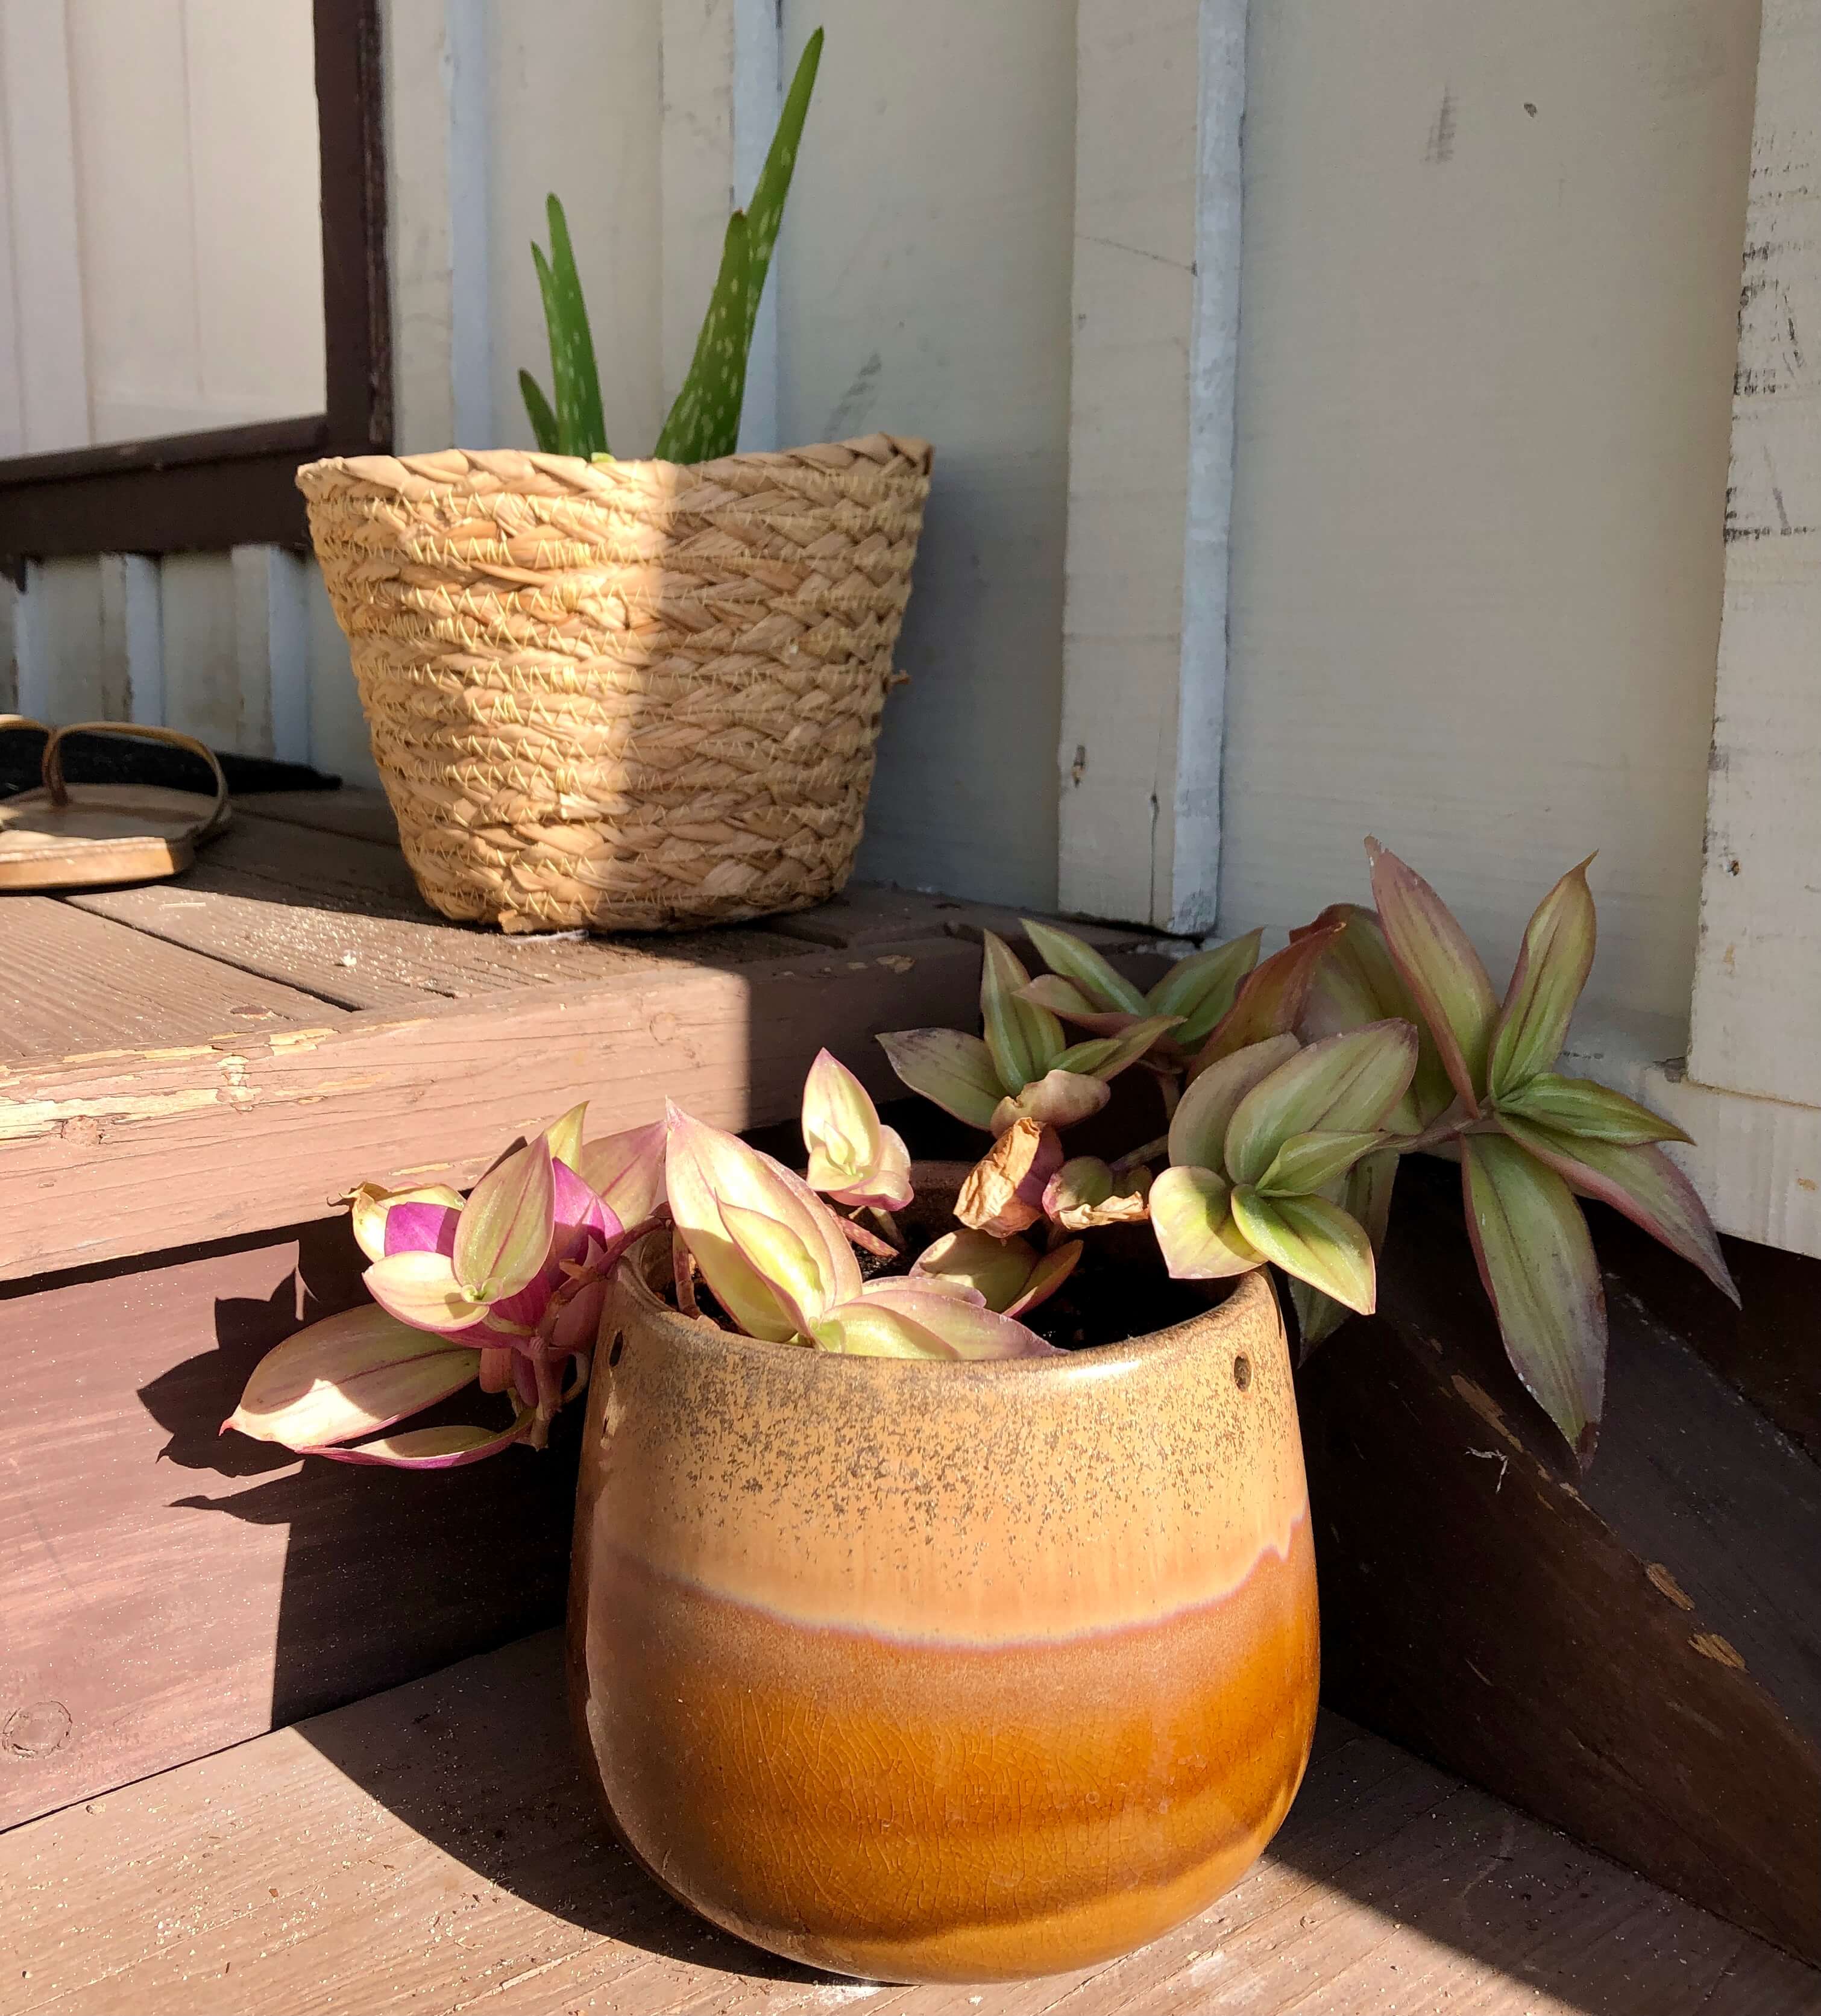 Two thrifted pots with plants sit on a porch which is a sustainable home decor option.